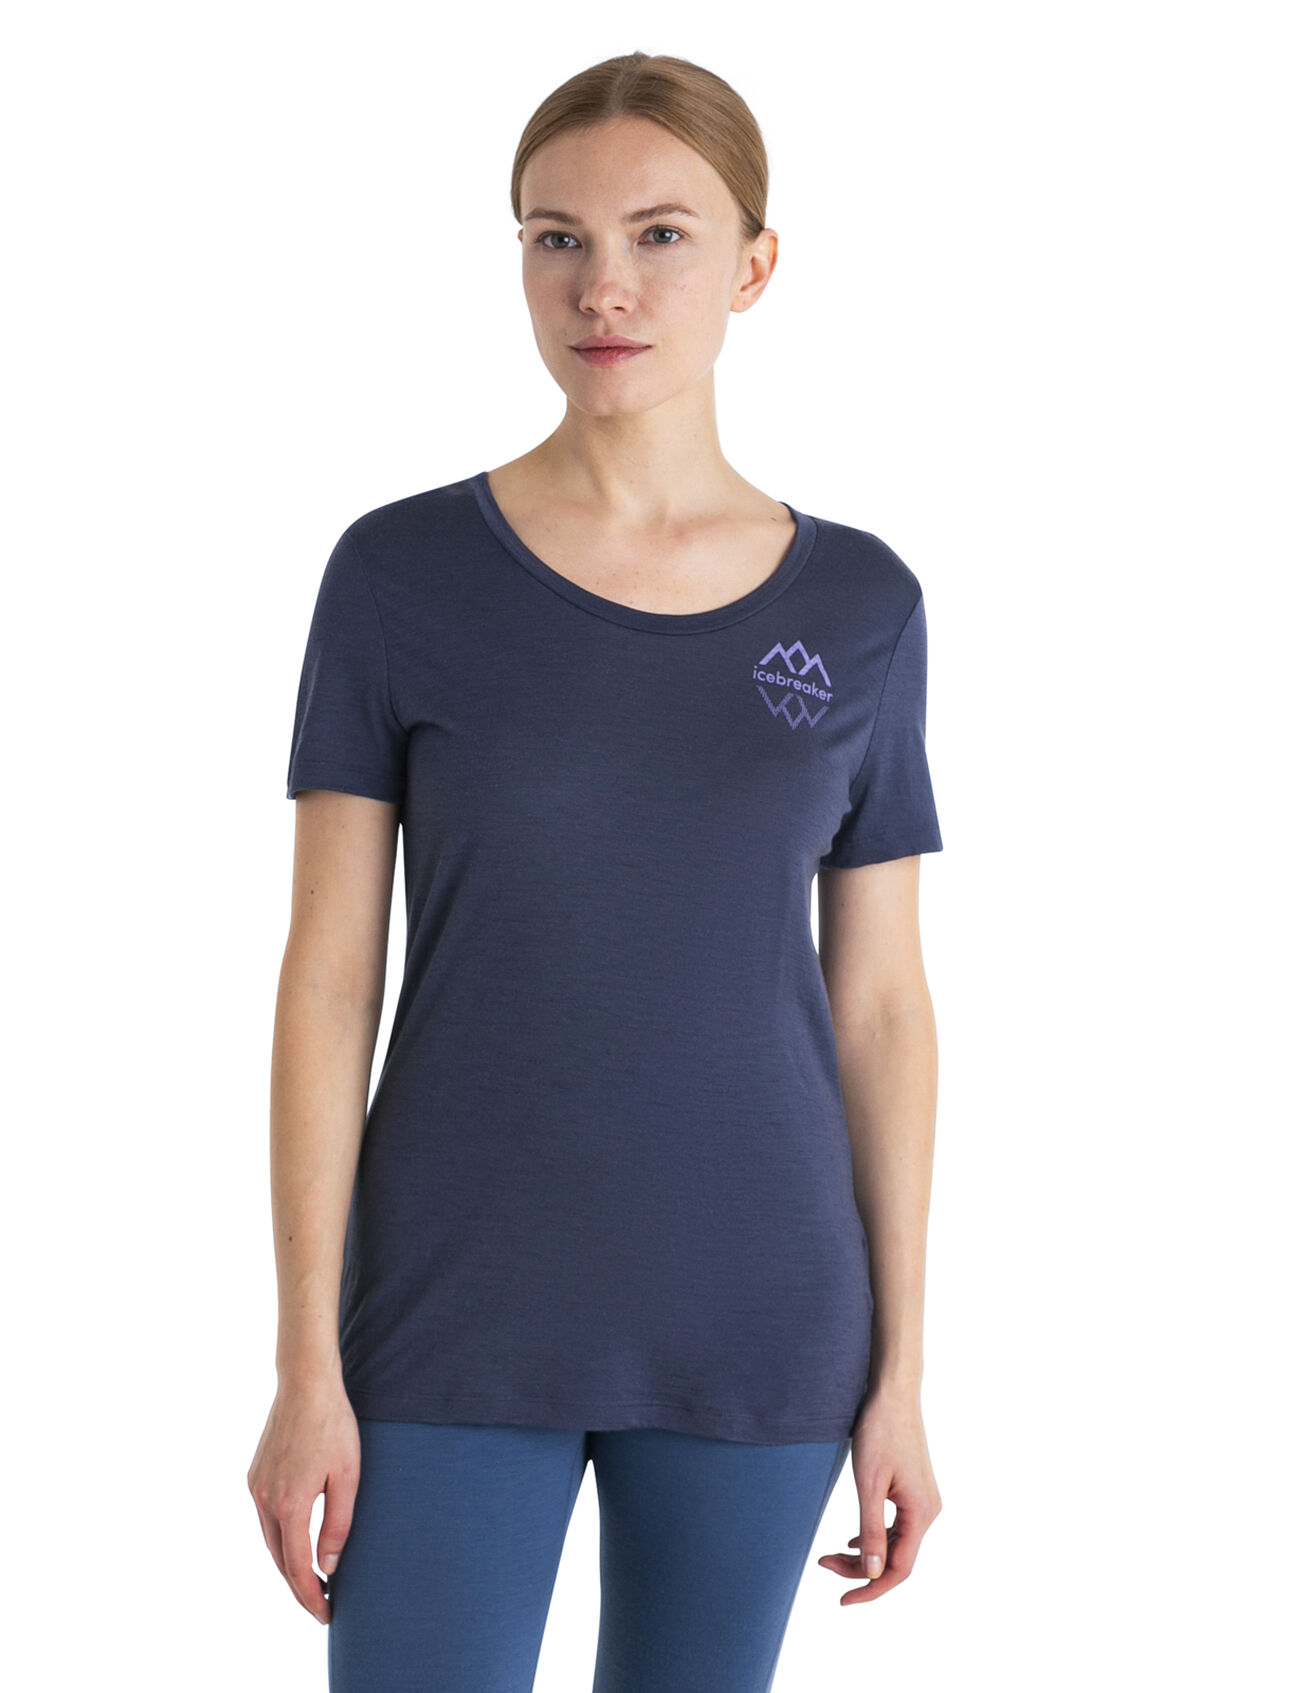 Womens Merino 150 Tech Lite III Scoop T-Shirt IB Logo Reflections Our most versatile tech tee that provides comfort, breathability and odour-resistance for four seasons worth of adventure, the Tech Lite III Short Sleeve Scoop Tee Icebreaker Logo Reflections features a flattering scoop-neck design and 100% merino for all-natural performance. Inspired by New Zealand's Aoraki (Mt. Cook), the tee's graphic artwork features the reflection of the mountain peaks onto the lake below.